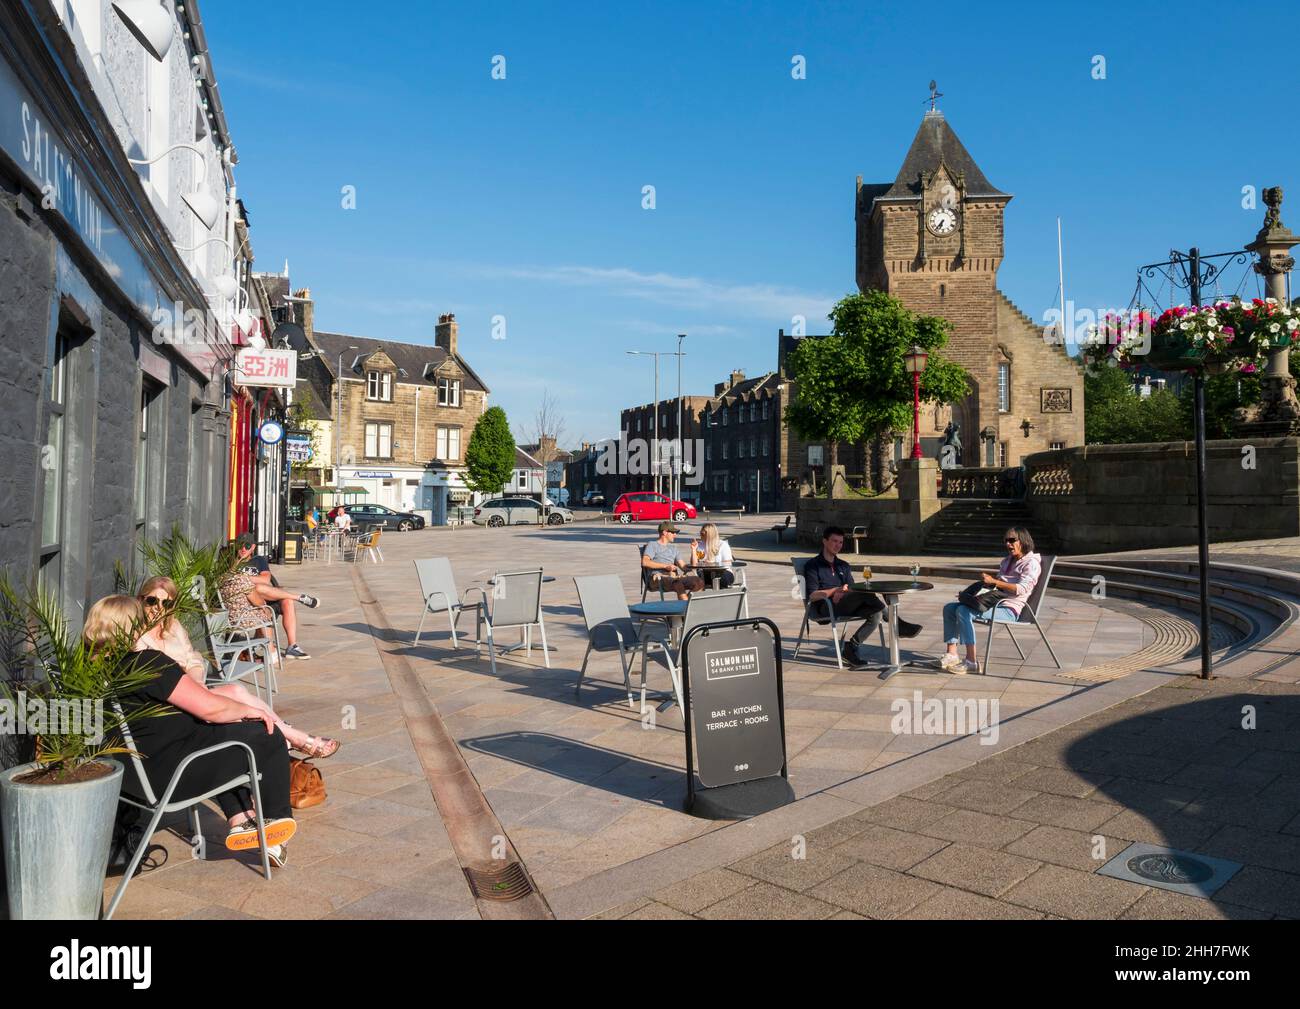 Galashiels, Selkirkshire, Scotland - the town hall and the Salmon Inn with outdoor seating in summer. Stock Photo